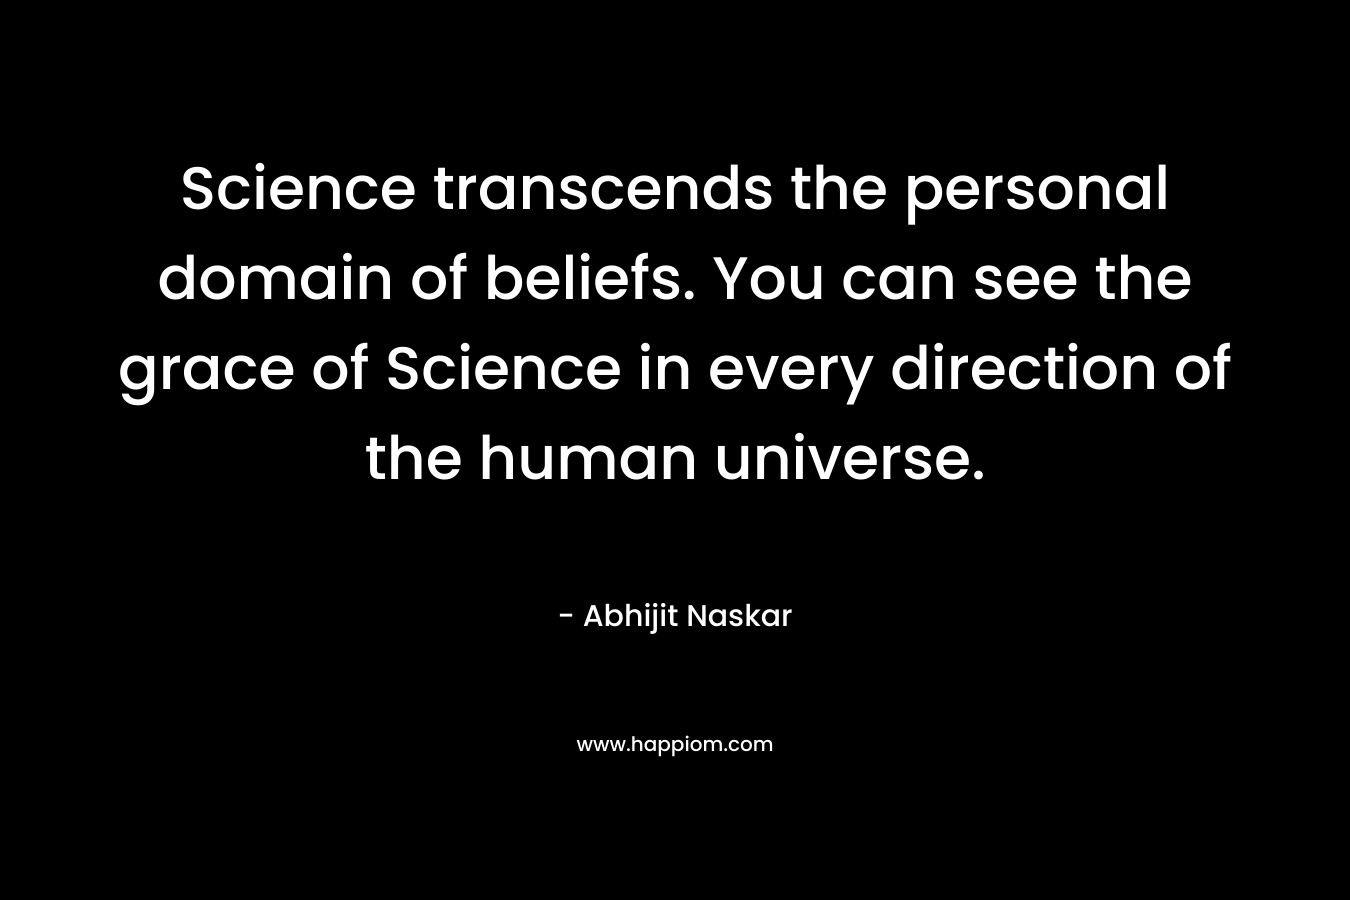 Science transcends the personal domain of beliefs. You can see the grace of Science in every direction of the human universe.